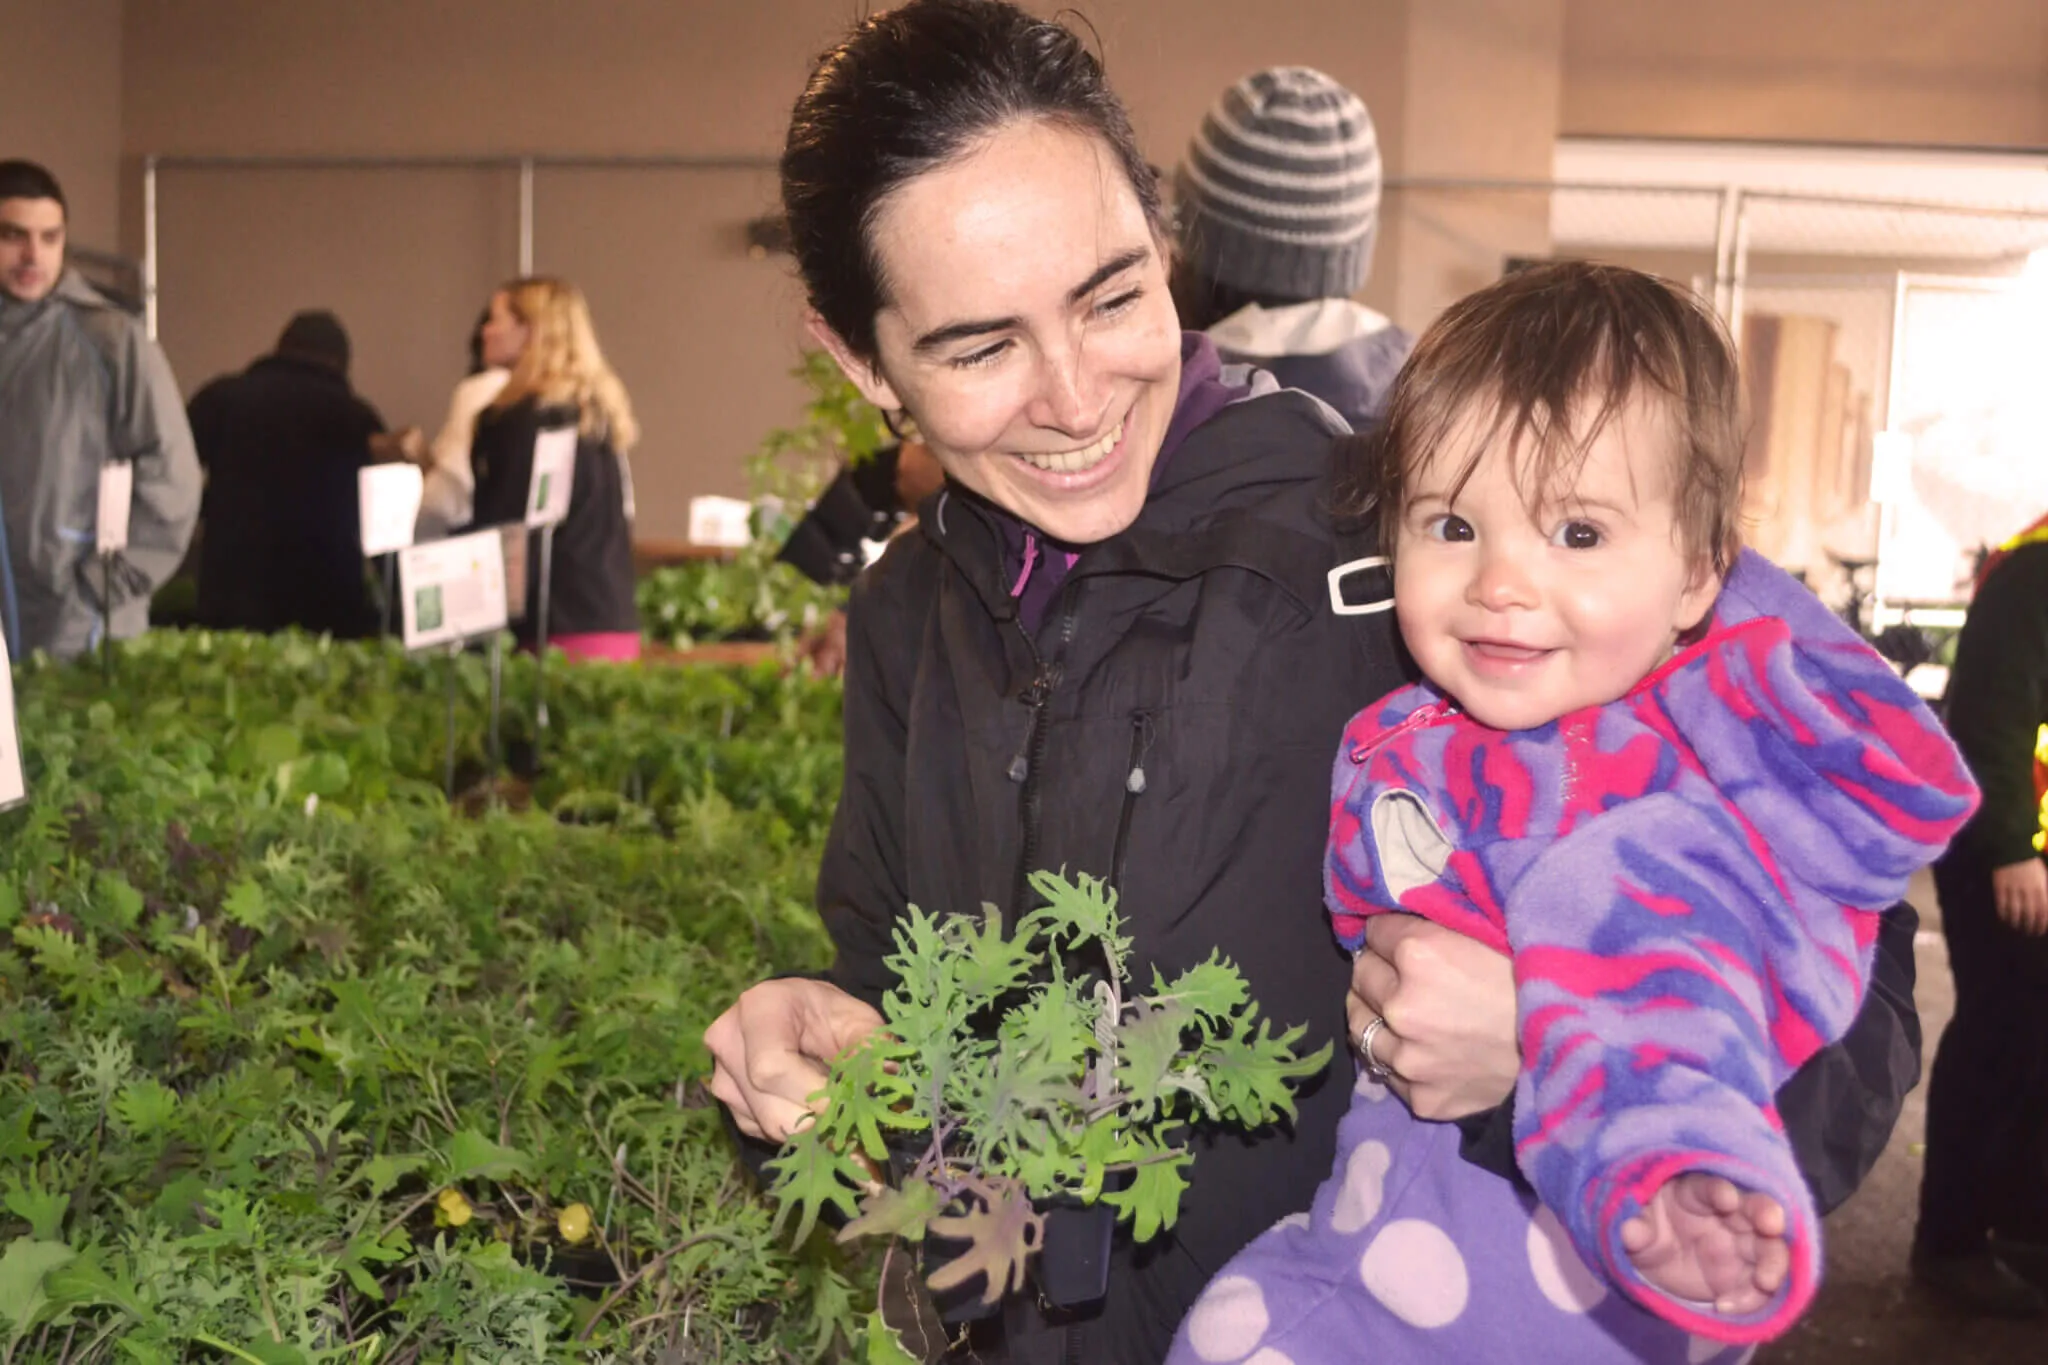 A woman looks at a smiling baby at a plant sale.